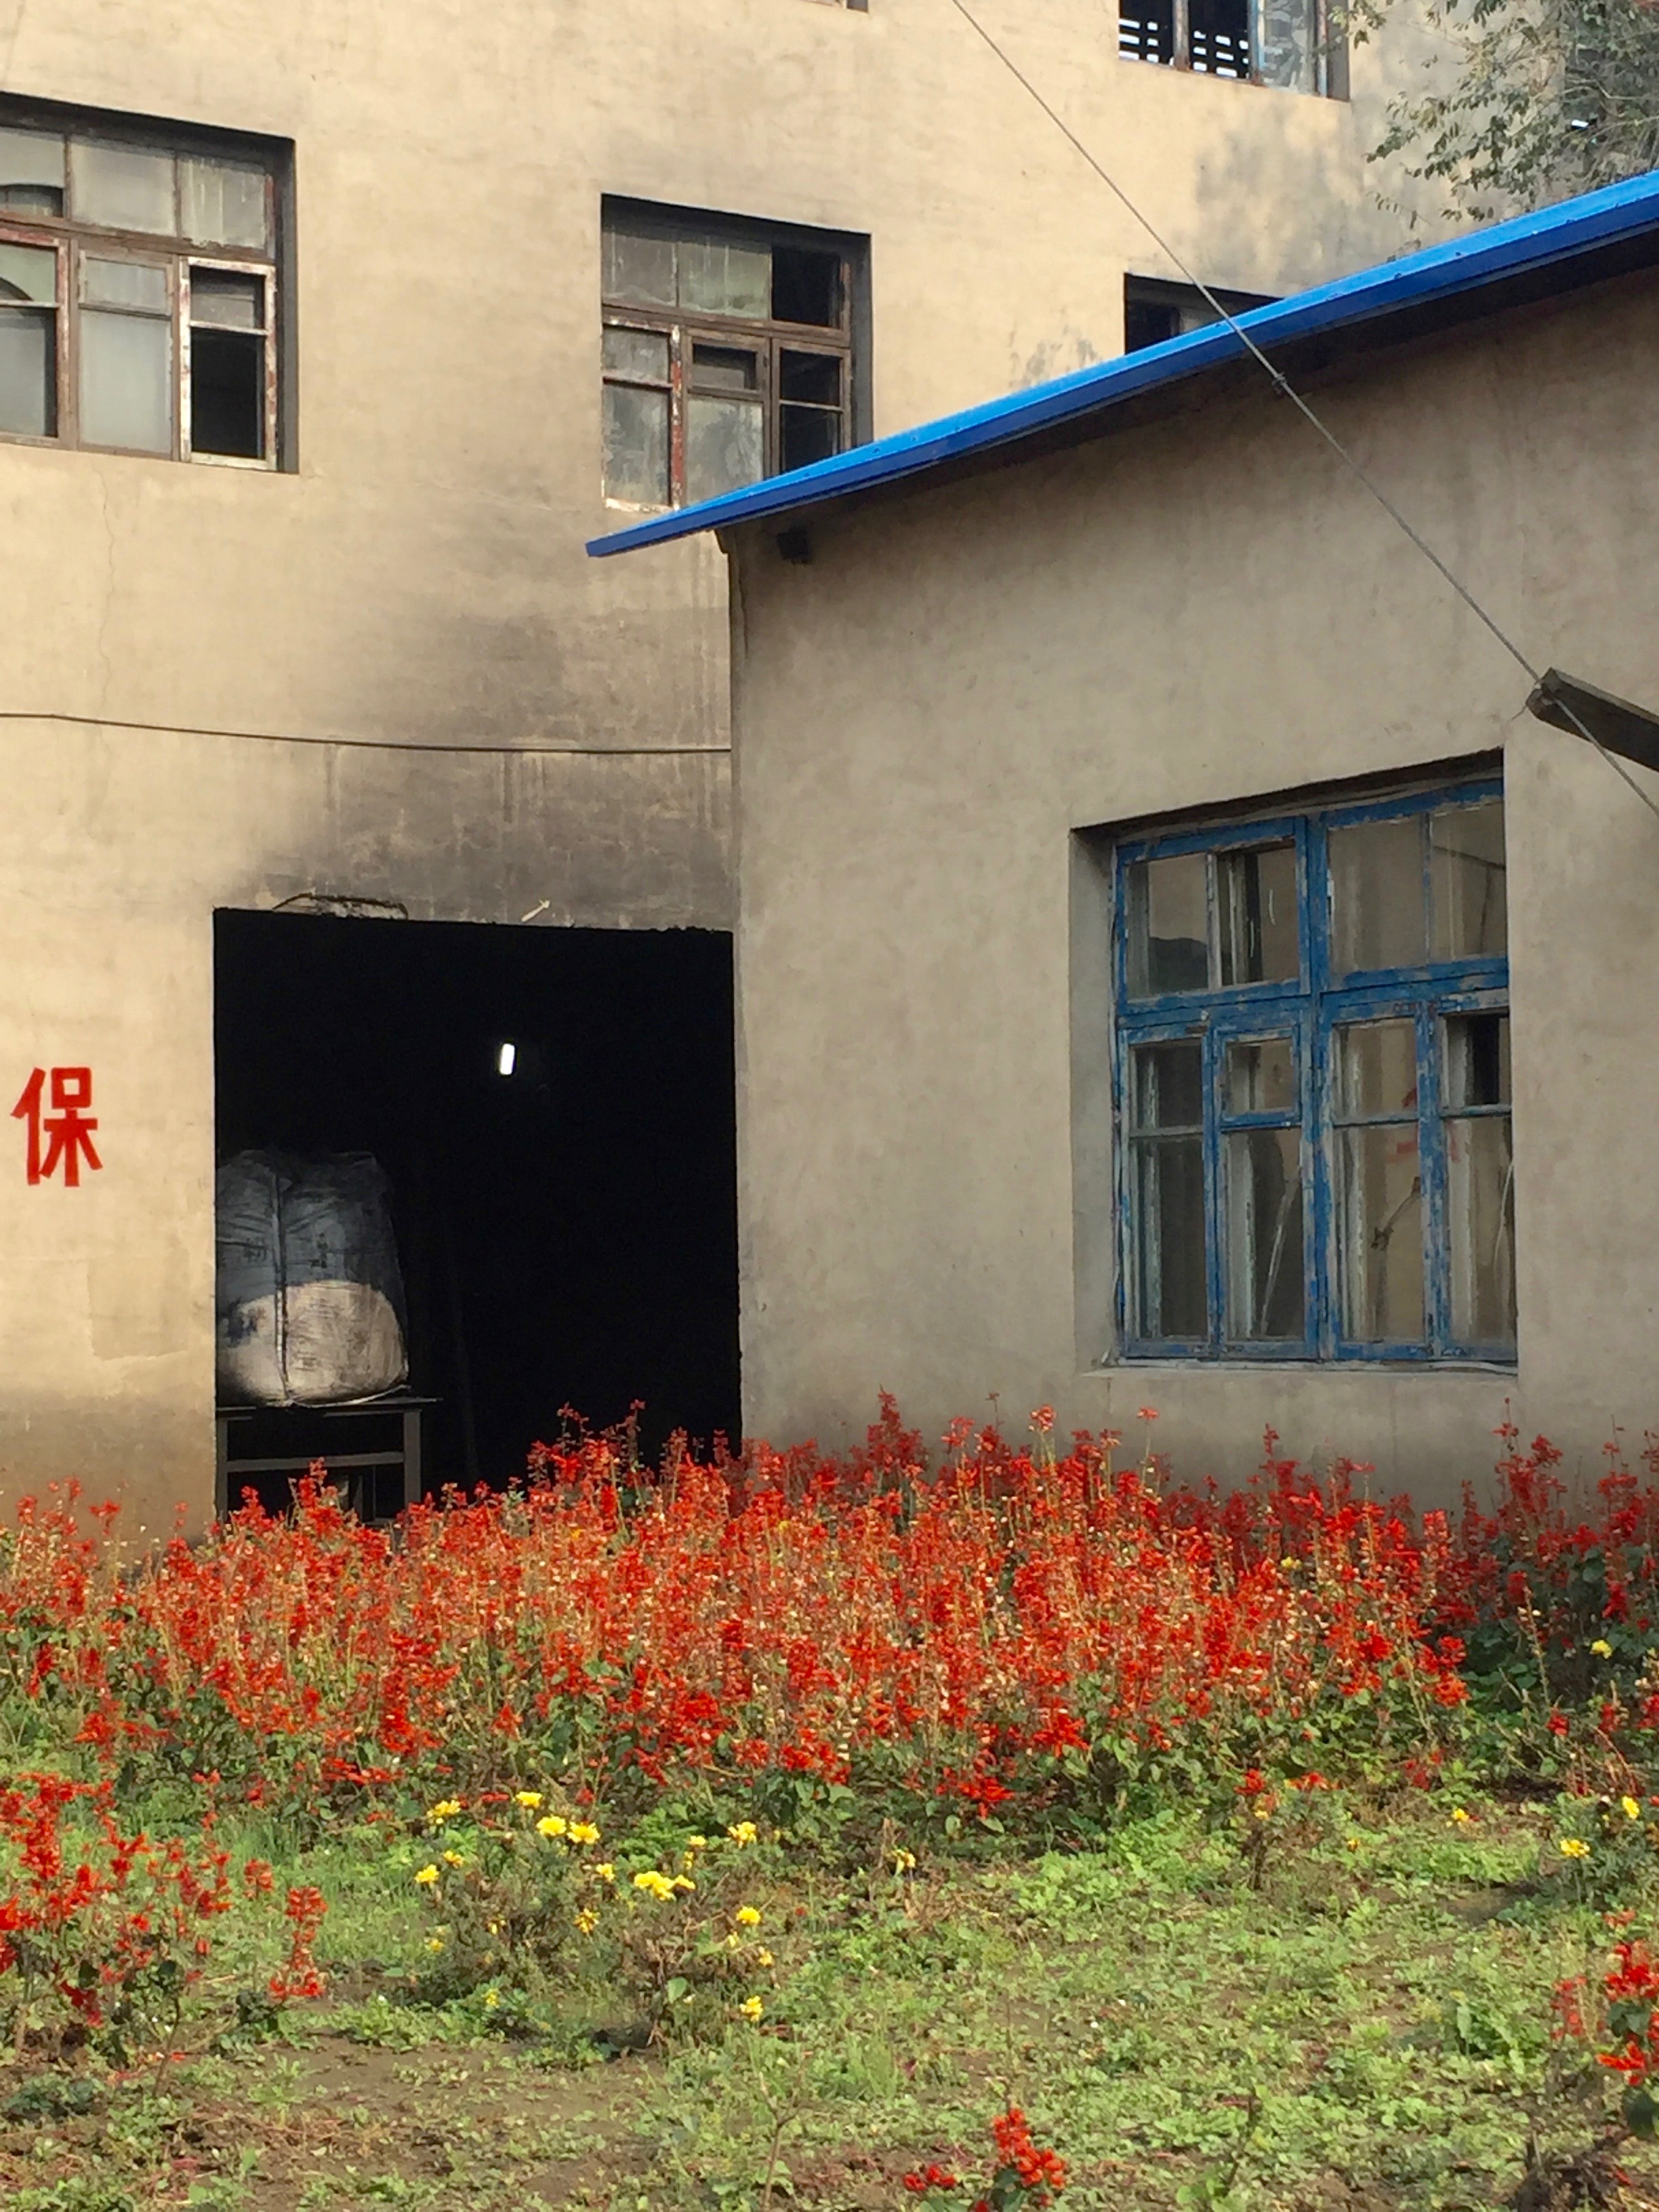  Contrast of the dirty coal room and red flowers. &nbsp; 